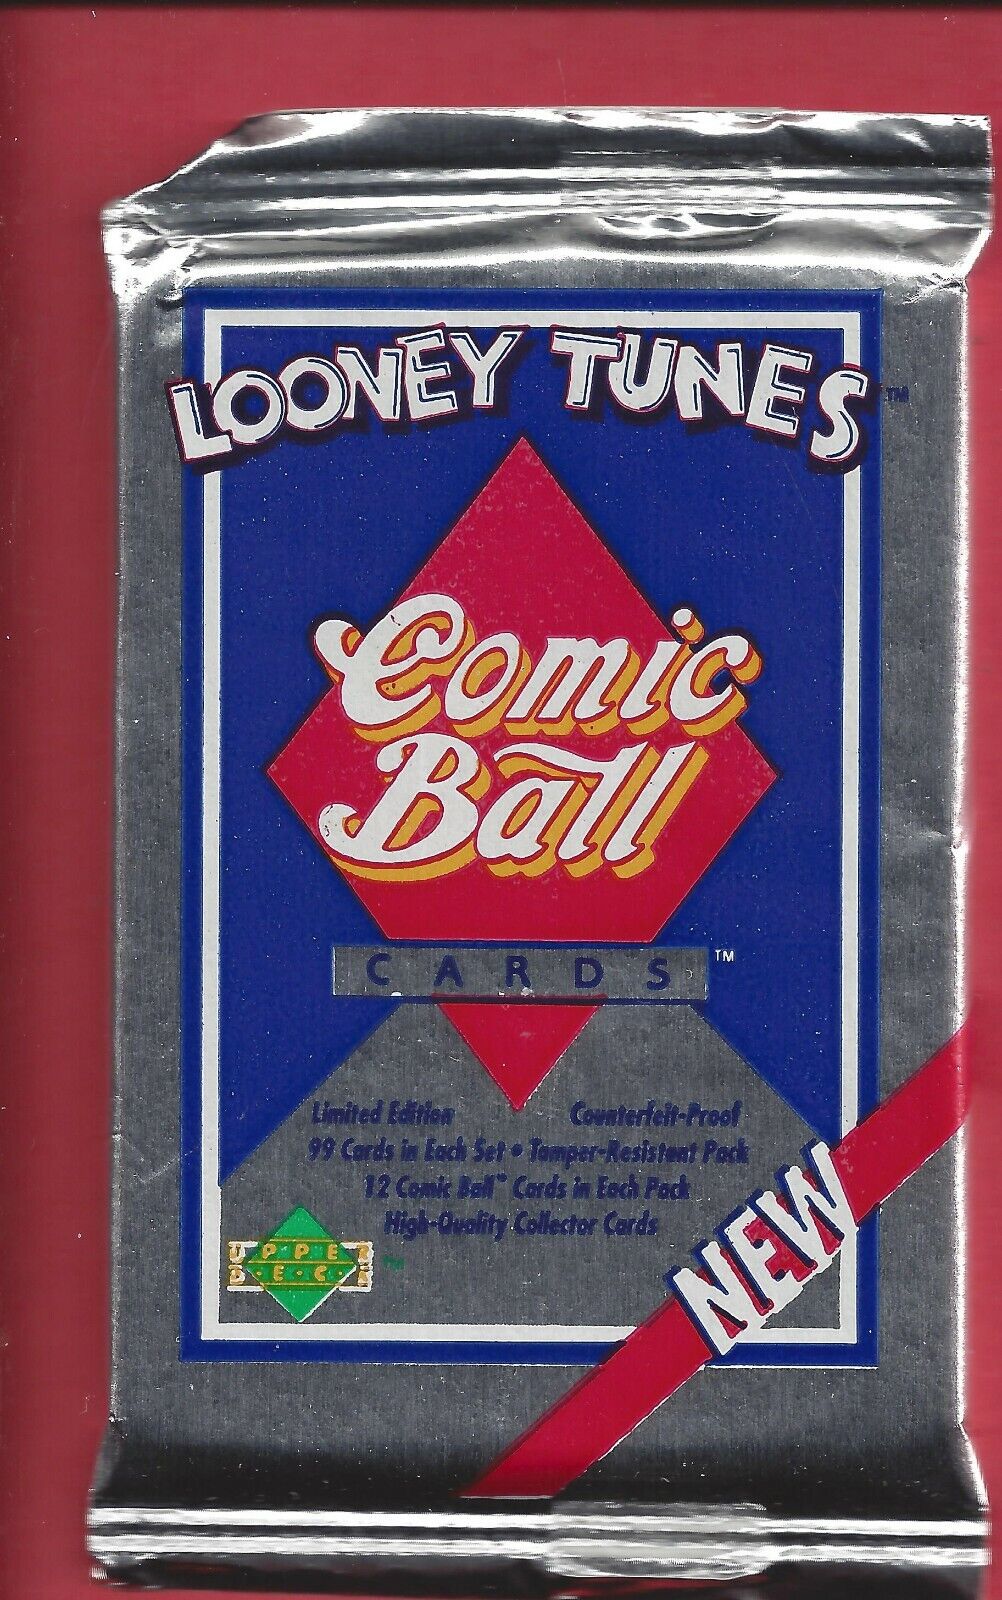 1990 UPPER DECK LOONEY TUNES COMIC BALL CARDS PACK SEALED